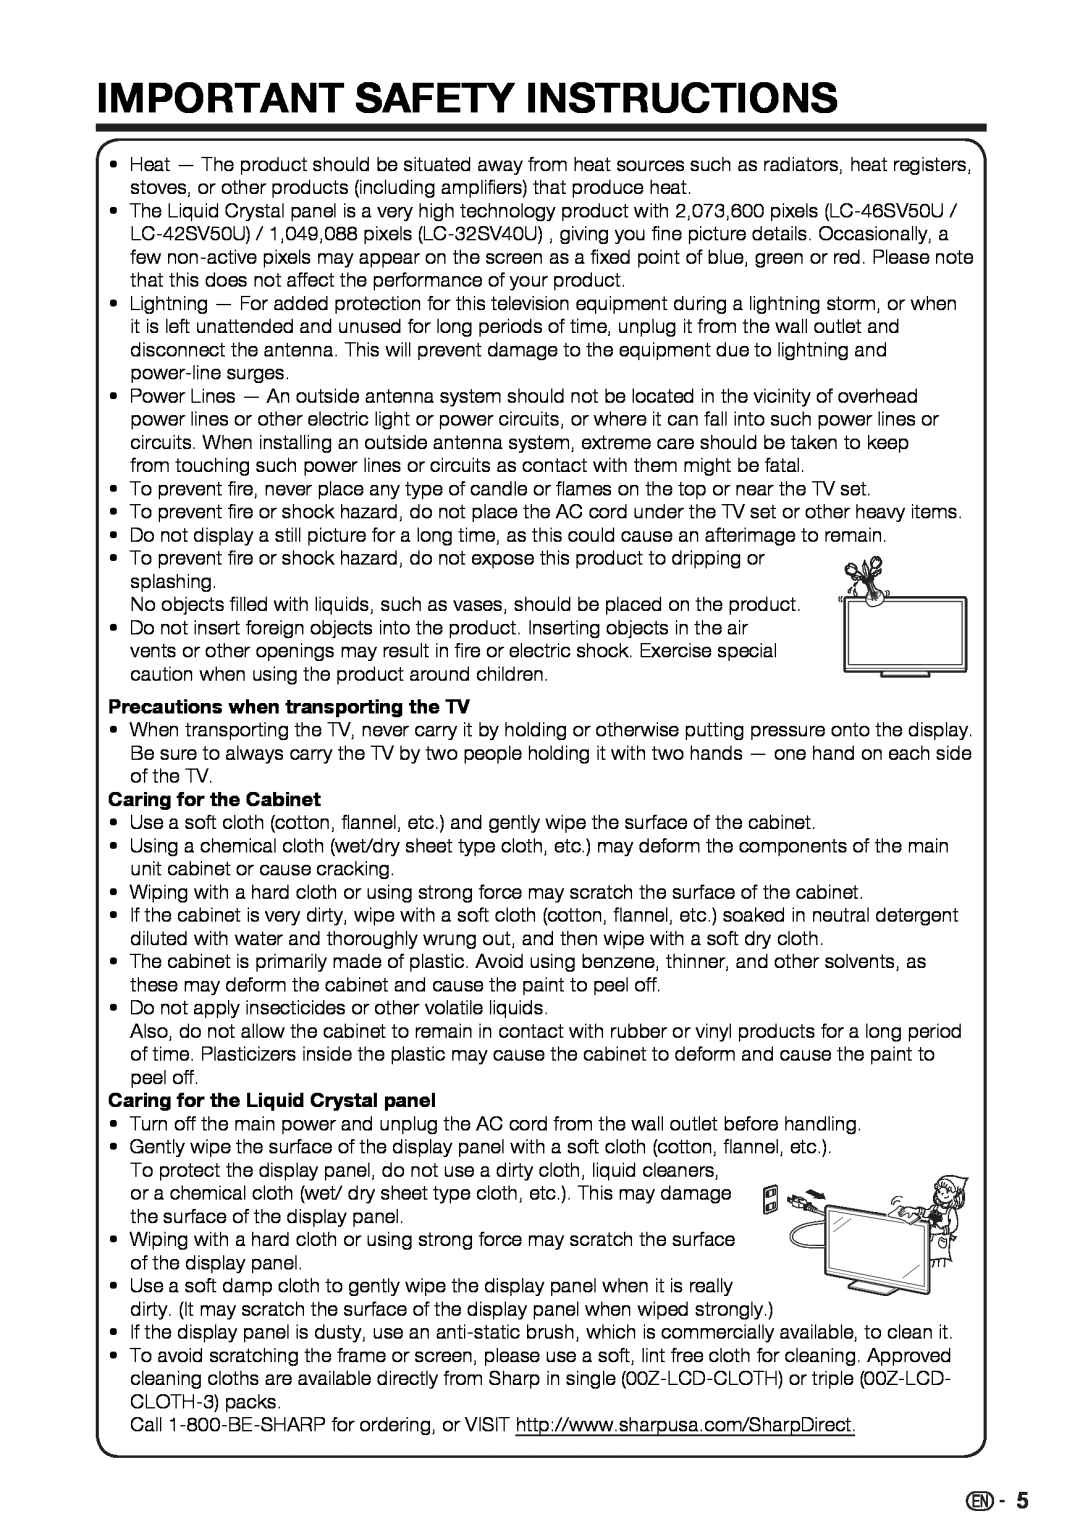 Sharp LC-42SV50U, LC-32SV40U Important Safety Instructions, Precautions when transporting the TV, Caring for the Cabinet 